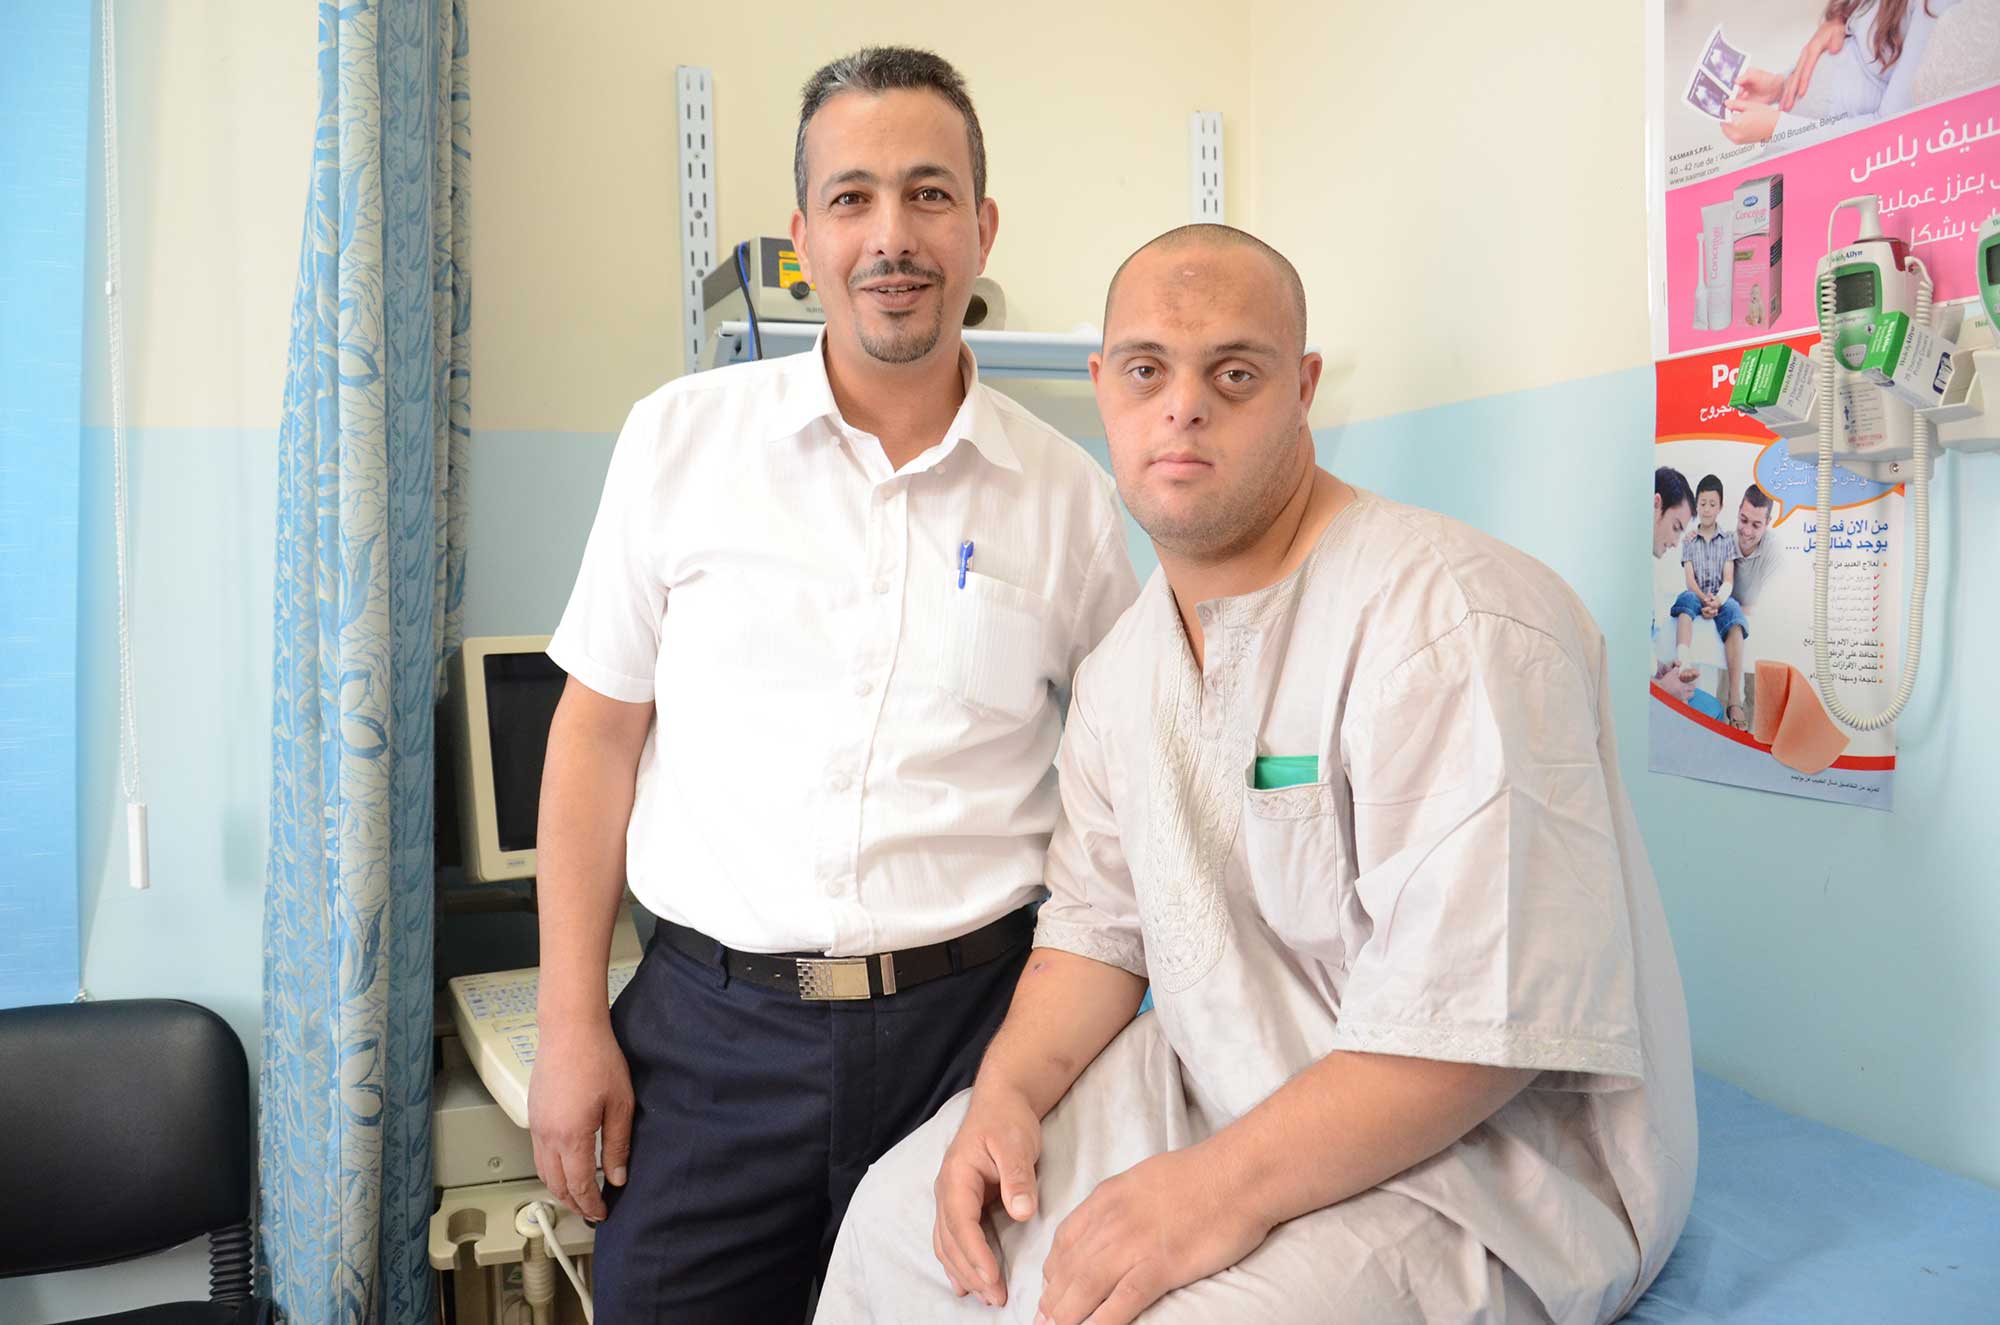 The recent medical donation to Palestine clinics helps patients like Mahmoud.